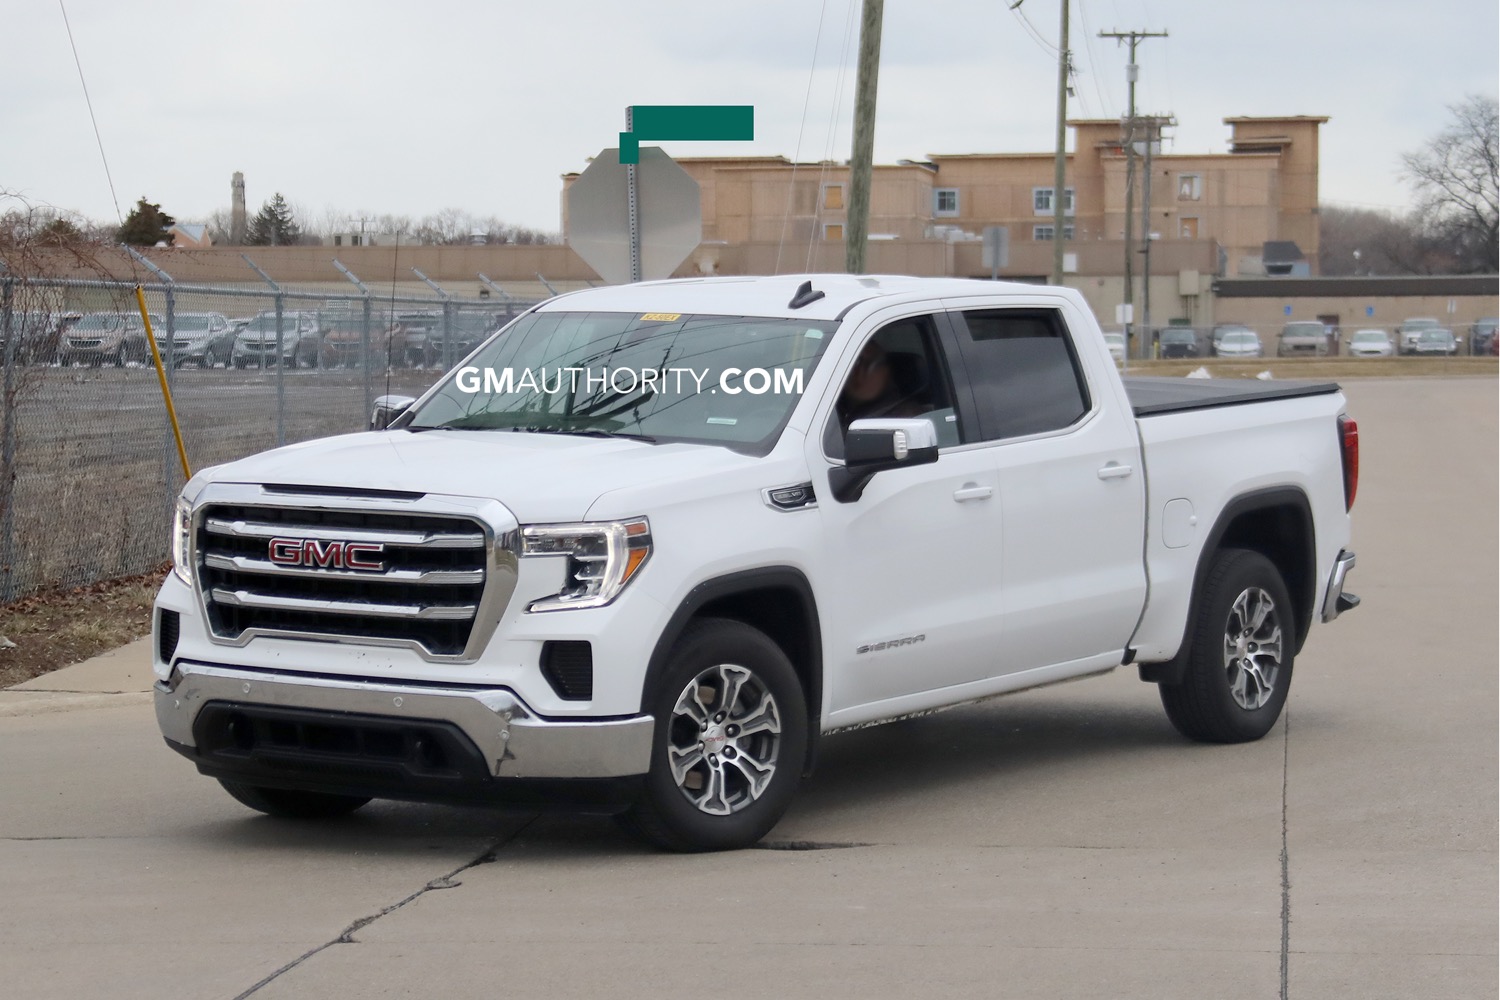 New 2019 Gmc Sierra Pictures Show Sle Trim Level Gm Authority